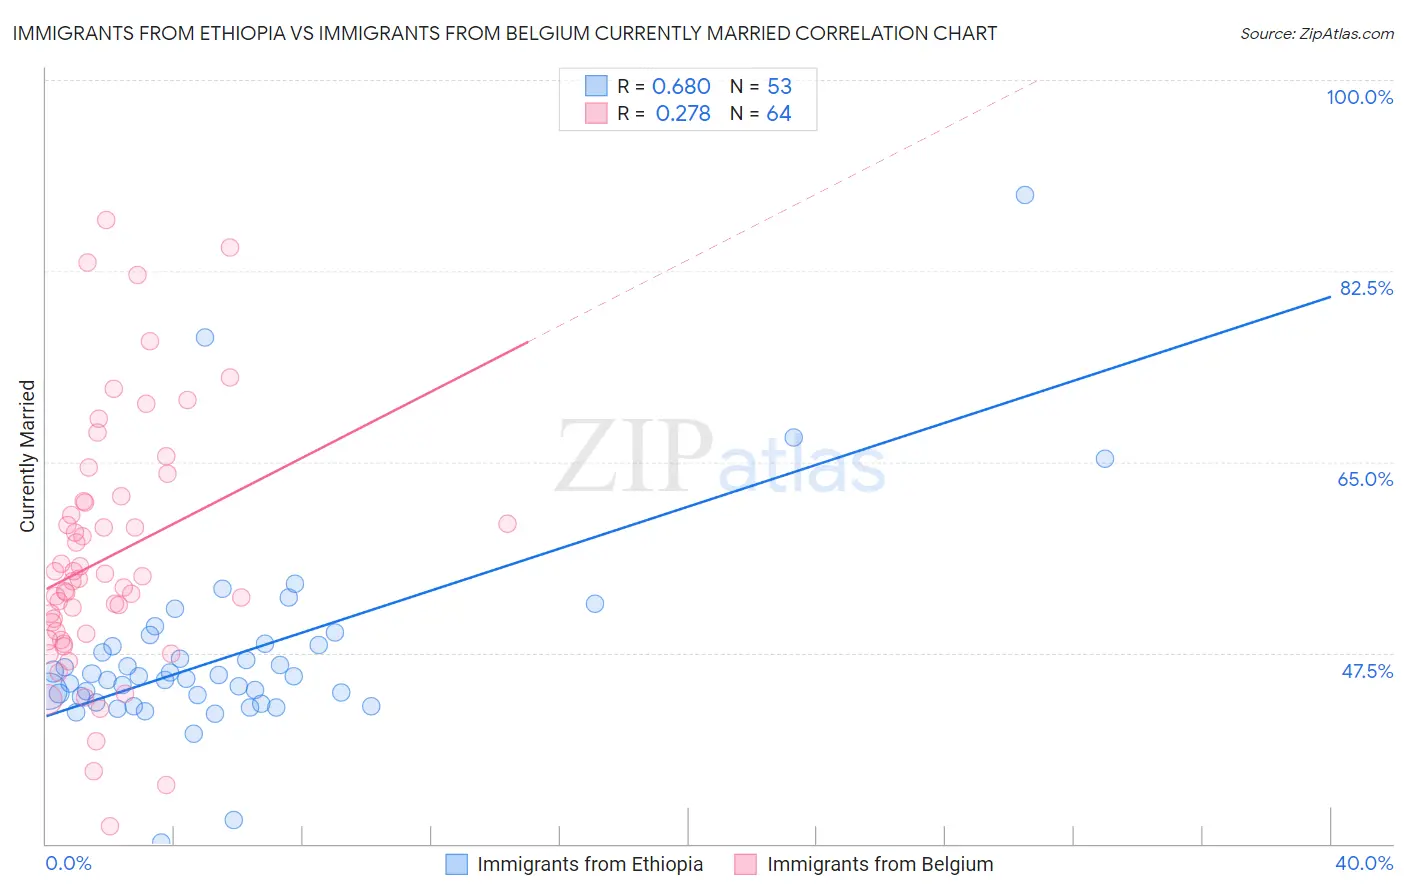 Immigrants from Ethiopia vs Immigrants from Belgium Currently Married